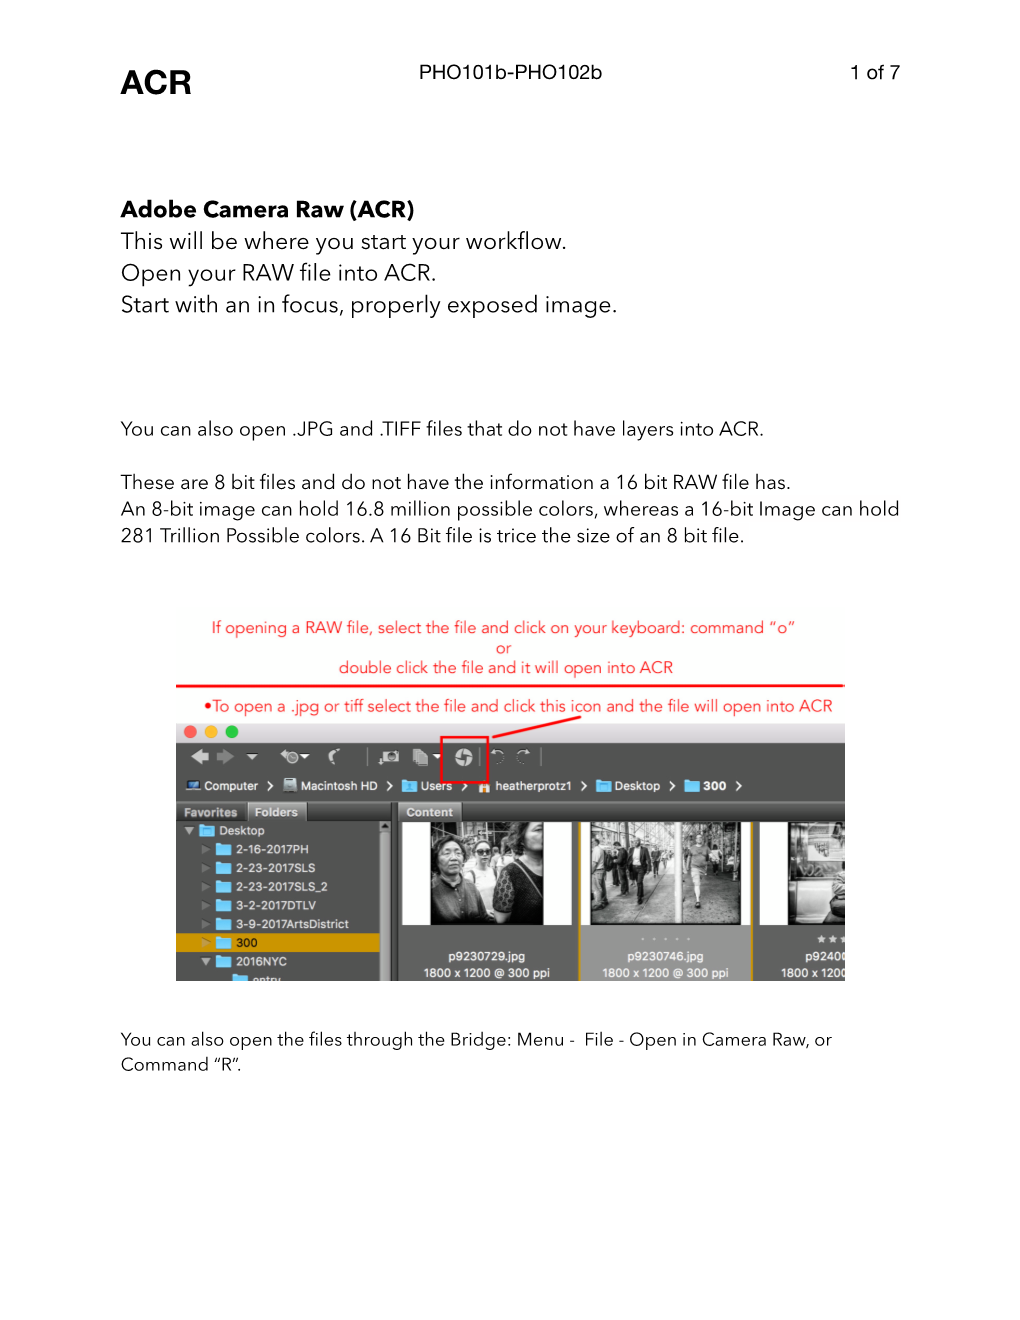 Adobe Camera Raw (ACR) This Will Be Where You Start Your Workﬂow